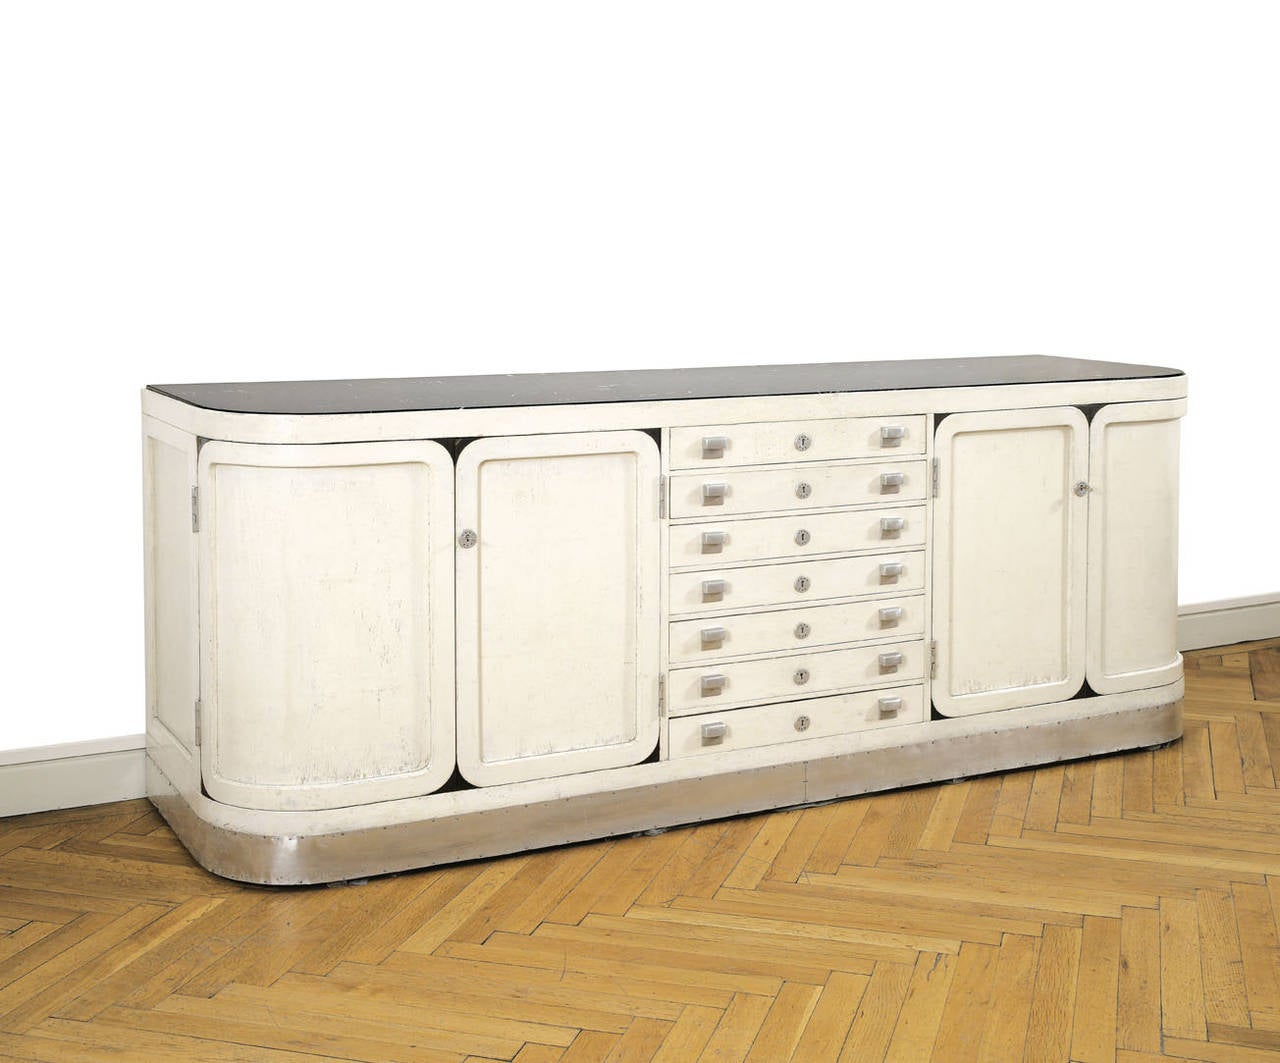 Buffet, before 1906
Manufactured by Jacob & Josef Kohn, Vienna
Beech, white and black lacquer, new marble top,
original white metal fittings
H 96.5 cm, W 250.5 cm, D 70 cm
Provenance: Collection of Vienna University of Applied Arts
Exhibition: